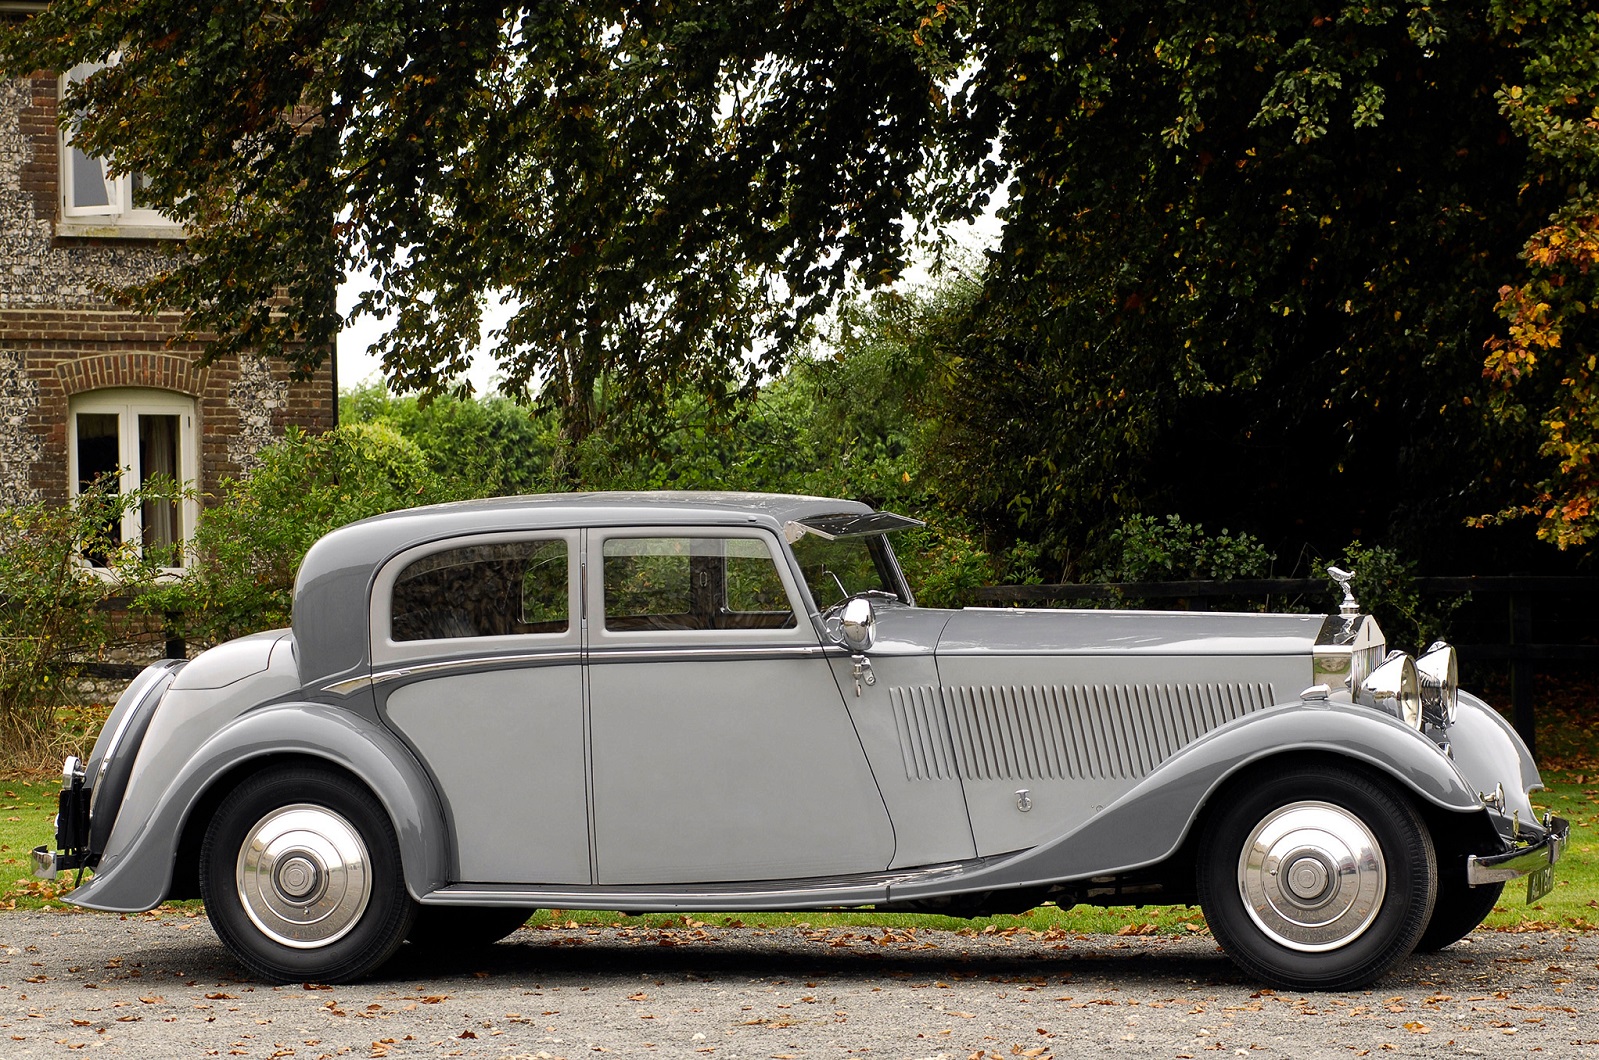 <p>The Rolls-Royce Phantom II was the <strong>pinnacle</strong> of luxury motoring at the start of the 1930s and came with an equally regal engine. The 7.6-liter <strong>straight-six</strong> might not have had the cylinder count of the later but smaller capacity Phantom III’s 7.3-liter V12, but it was an impressively <strong>smooth</strong>, refined engine befitting of this car and its clientele.</p><p>To achieve such smooth running, the engine had seven main bearings and also featured a one-piece cylinder head cast in aluminum. <strong>Dual ignition</strong> was standard practice for this model thanks to Rolls-Royce’s <strong>aero</strong><strong>-engine</strong> experience and desire for reliability. For those choosing the <strong>Continental</strong> model, <strong>racier</strong> camshafts were an option to increase power, though the factory never disclosed outputs for either version of the motor.</p>